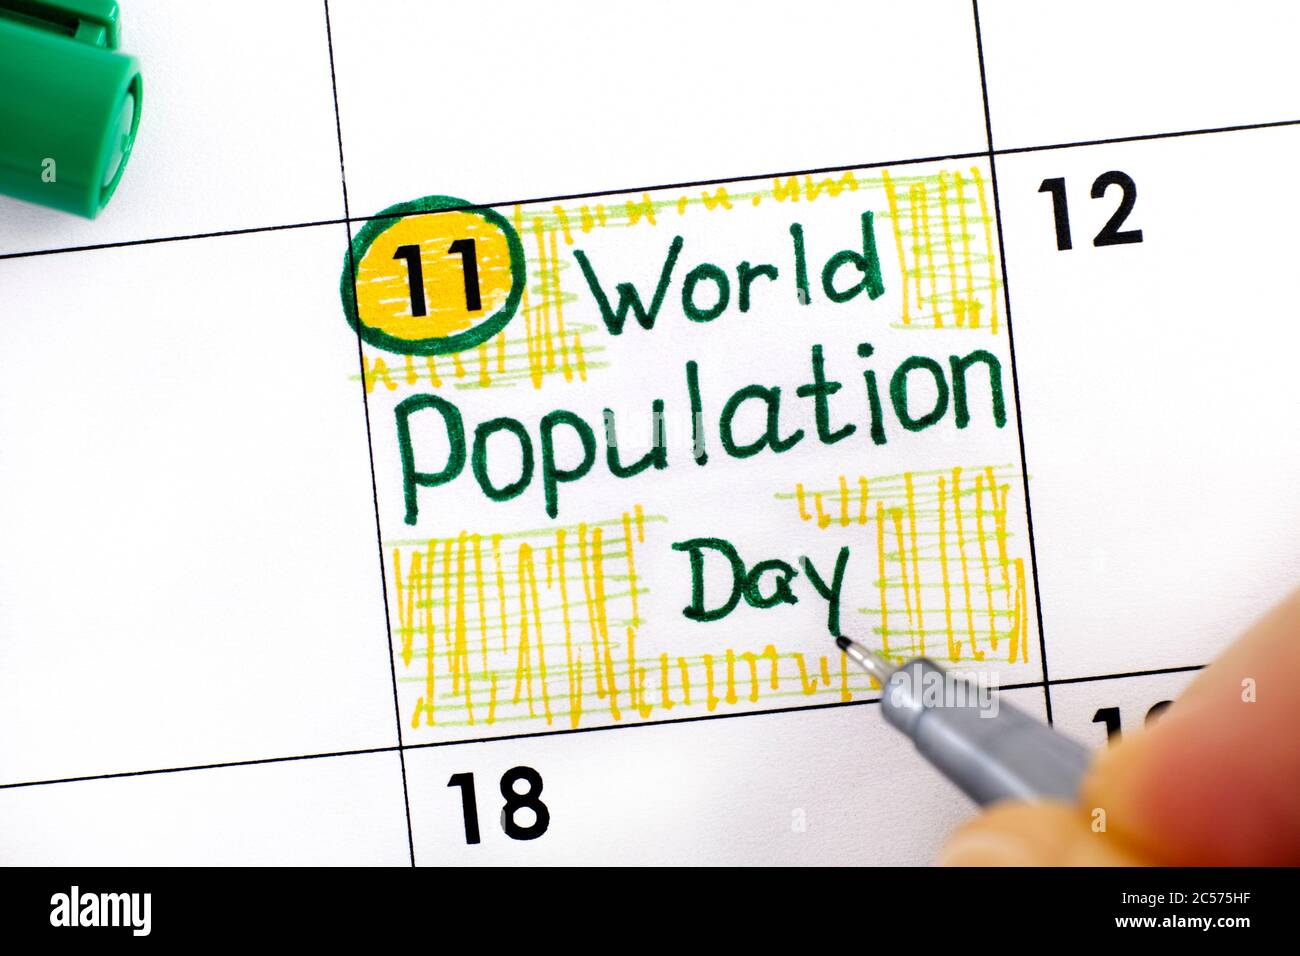 Woman fingers with pen writing reminder World Population Day in calendar. July 11 Stock Photo